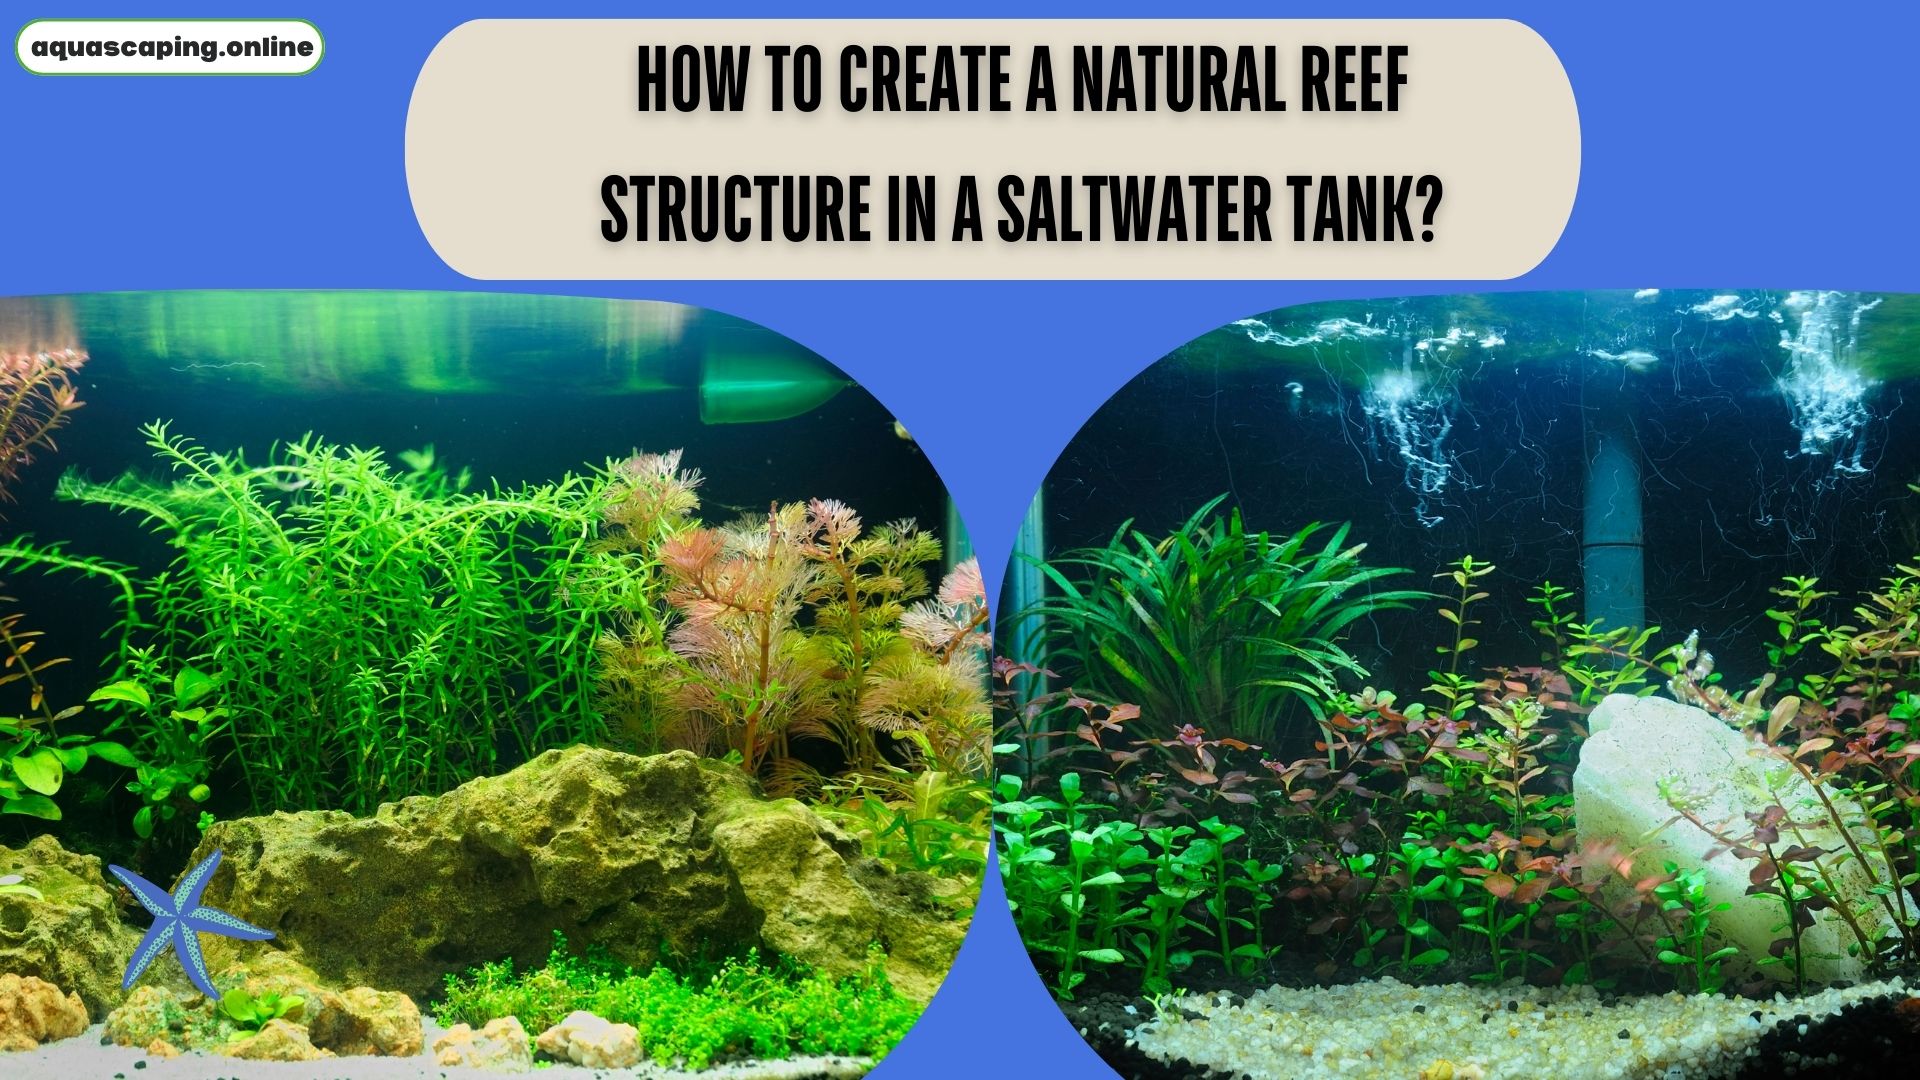 Natural reef structure in a saltwater tank